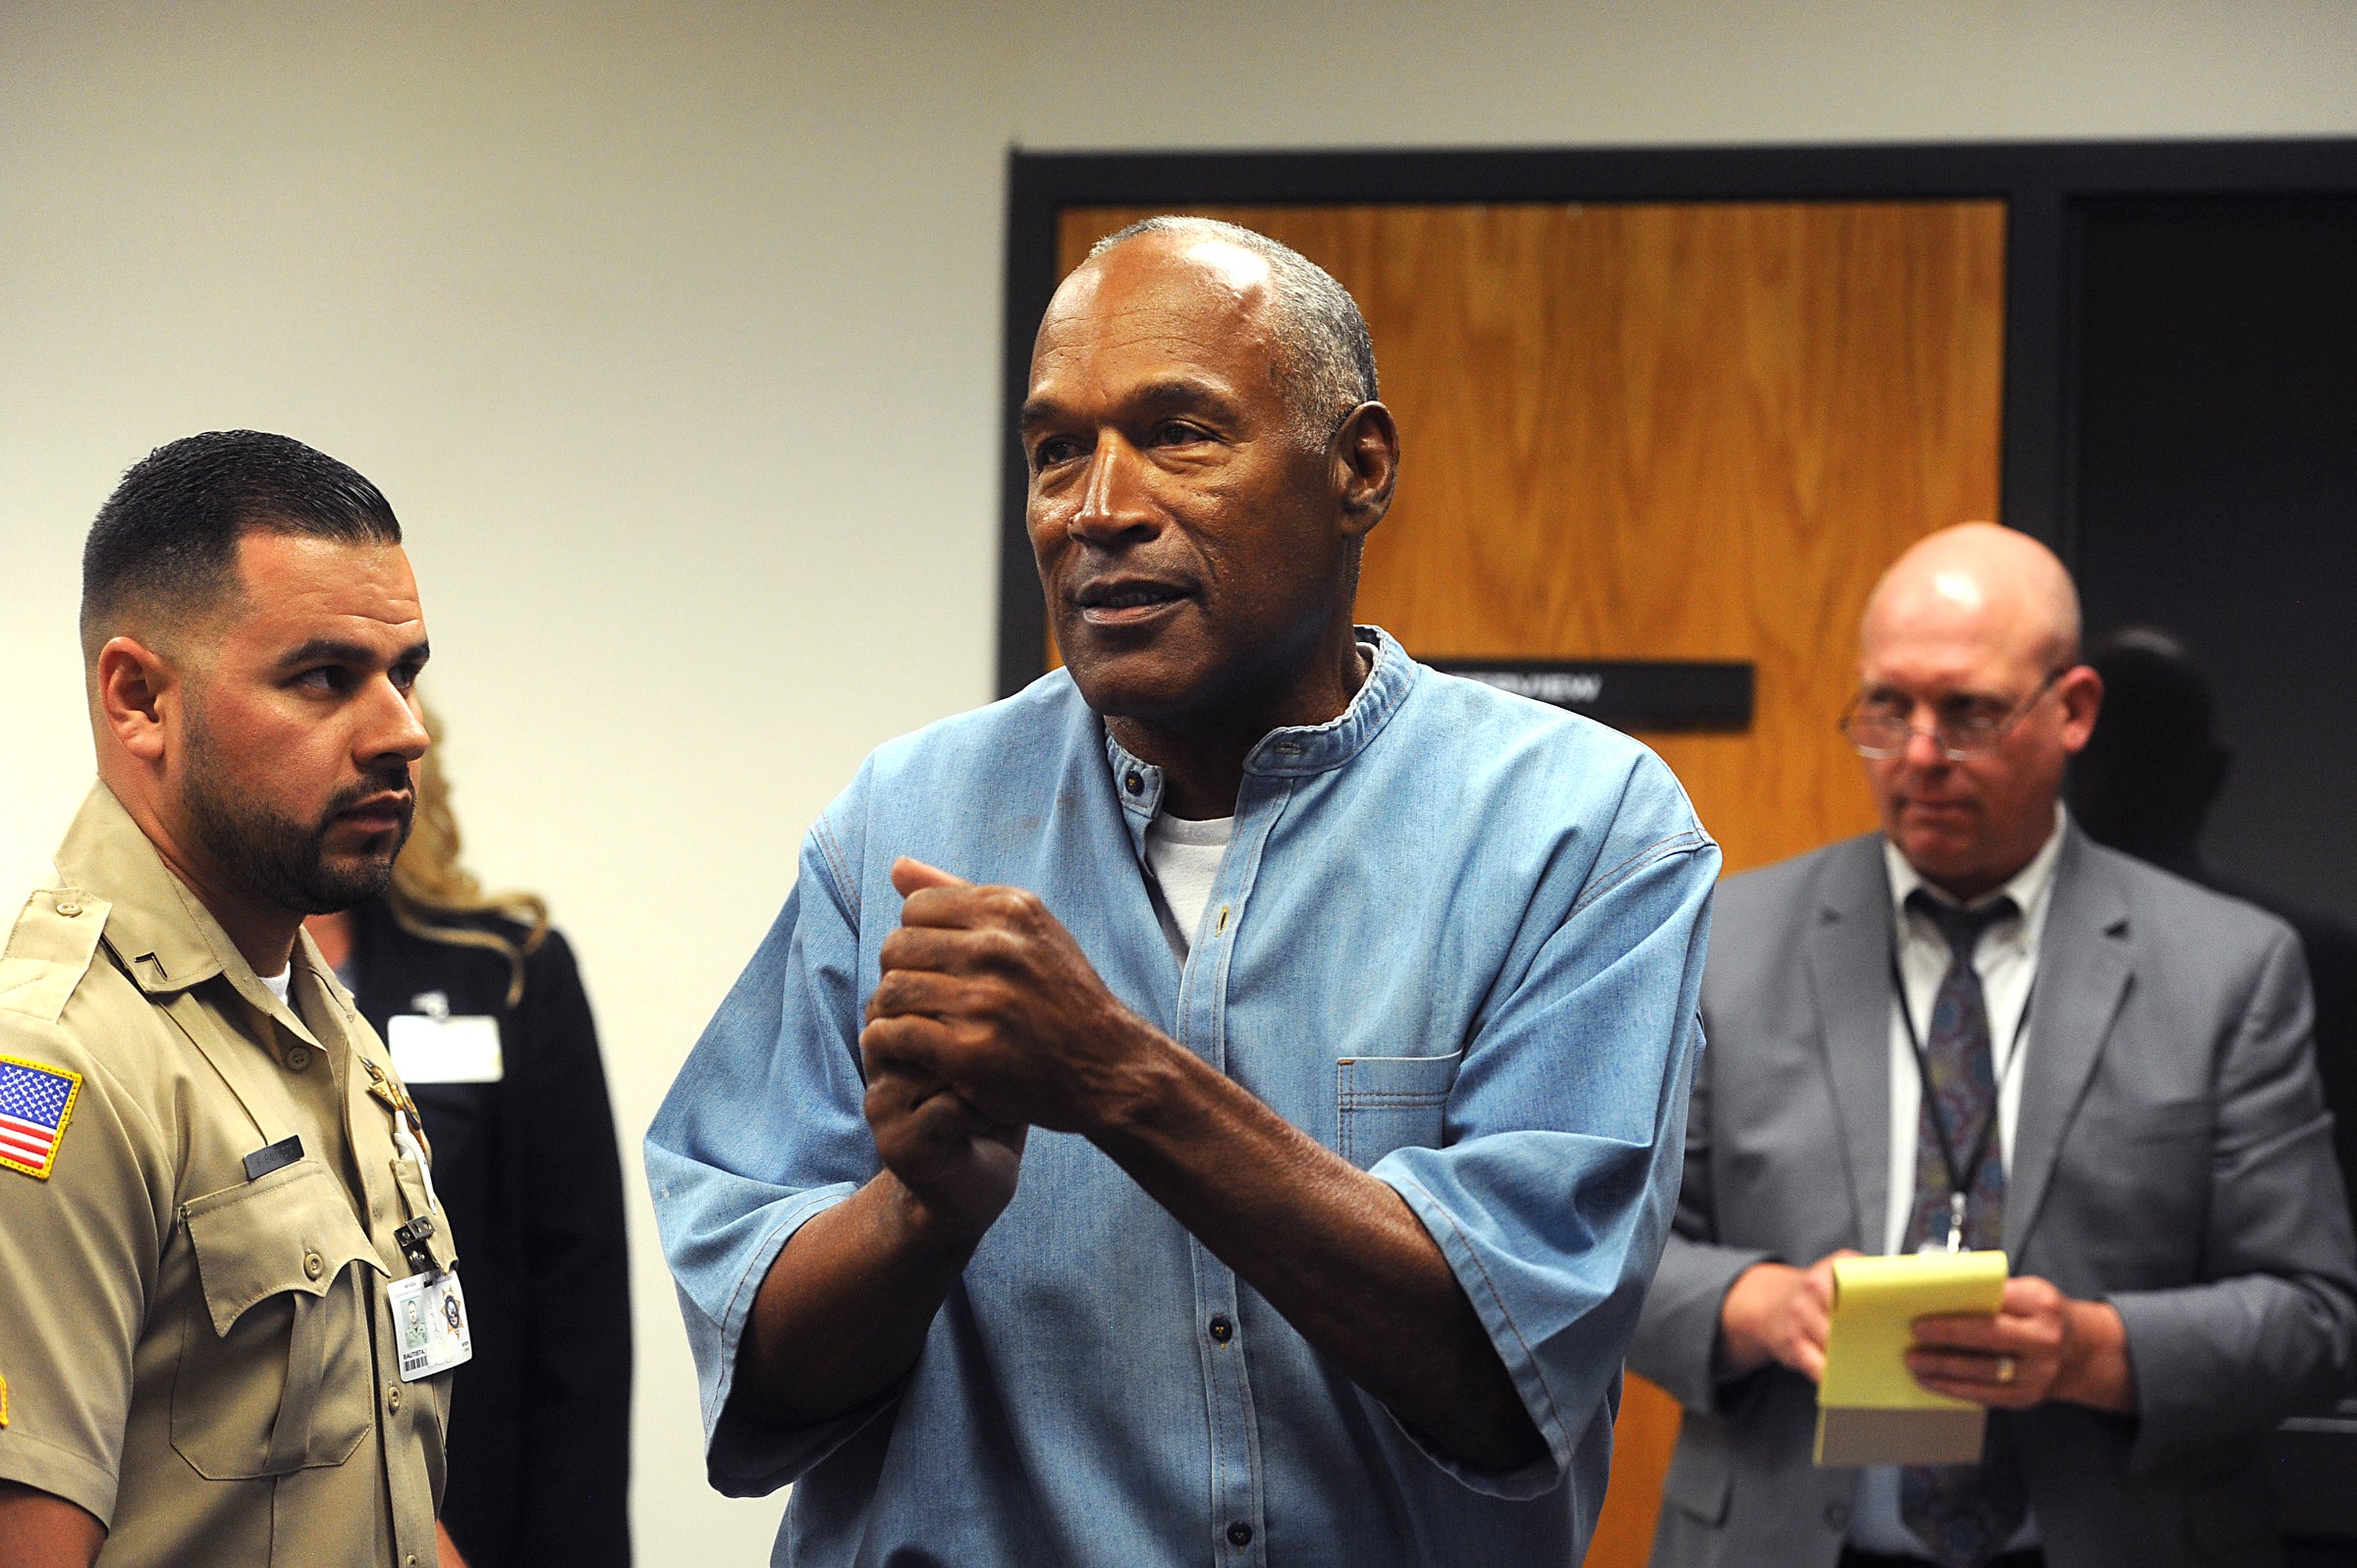 O.J. Simpson (C) reacts after learning he was granted parole at Lovelock Correctional Center July 20, 2017 in Lovelock, Nevada. Simpson is serving a nine to 33 year prison term for a 2007 armed robbery and kidnapping conviction